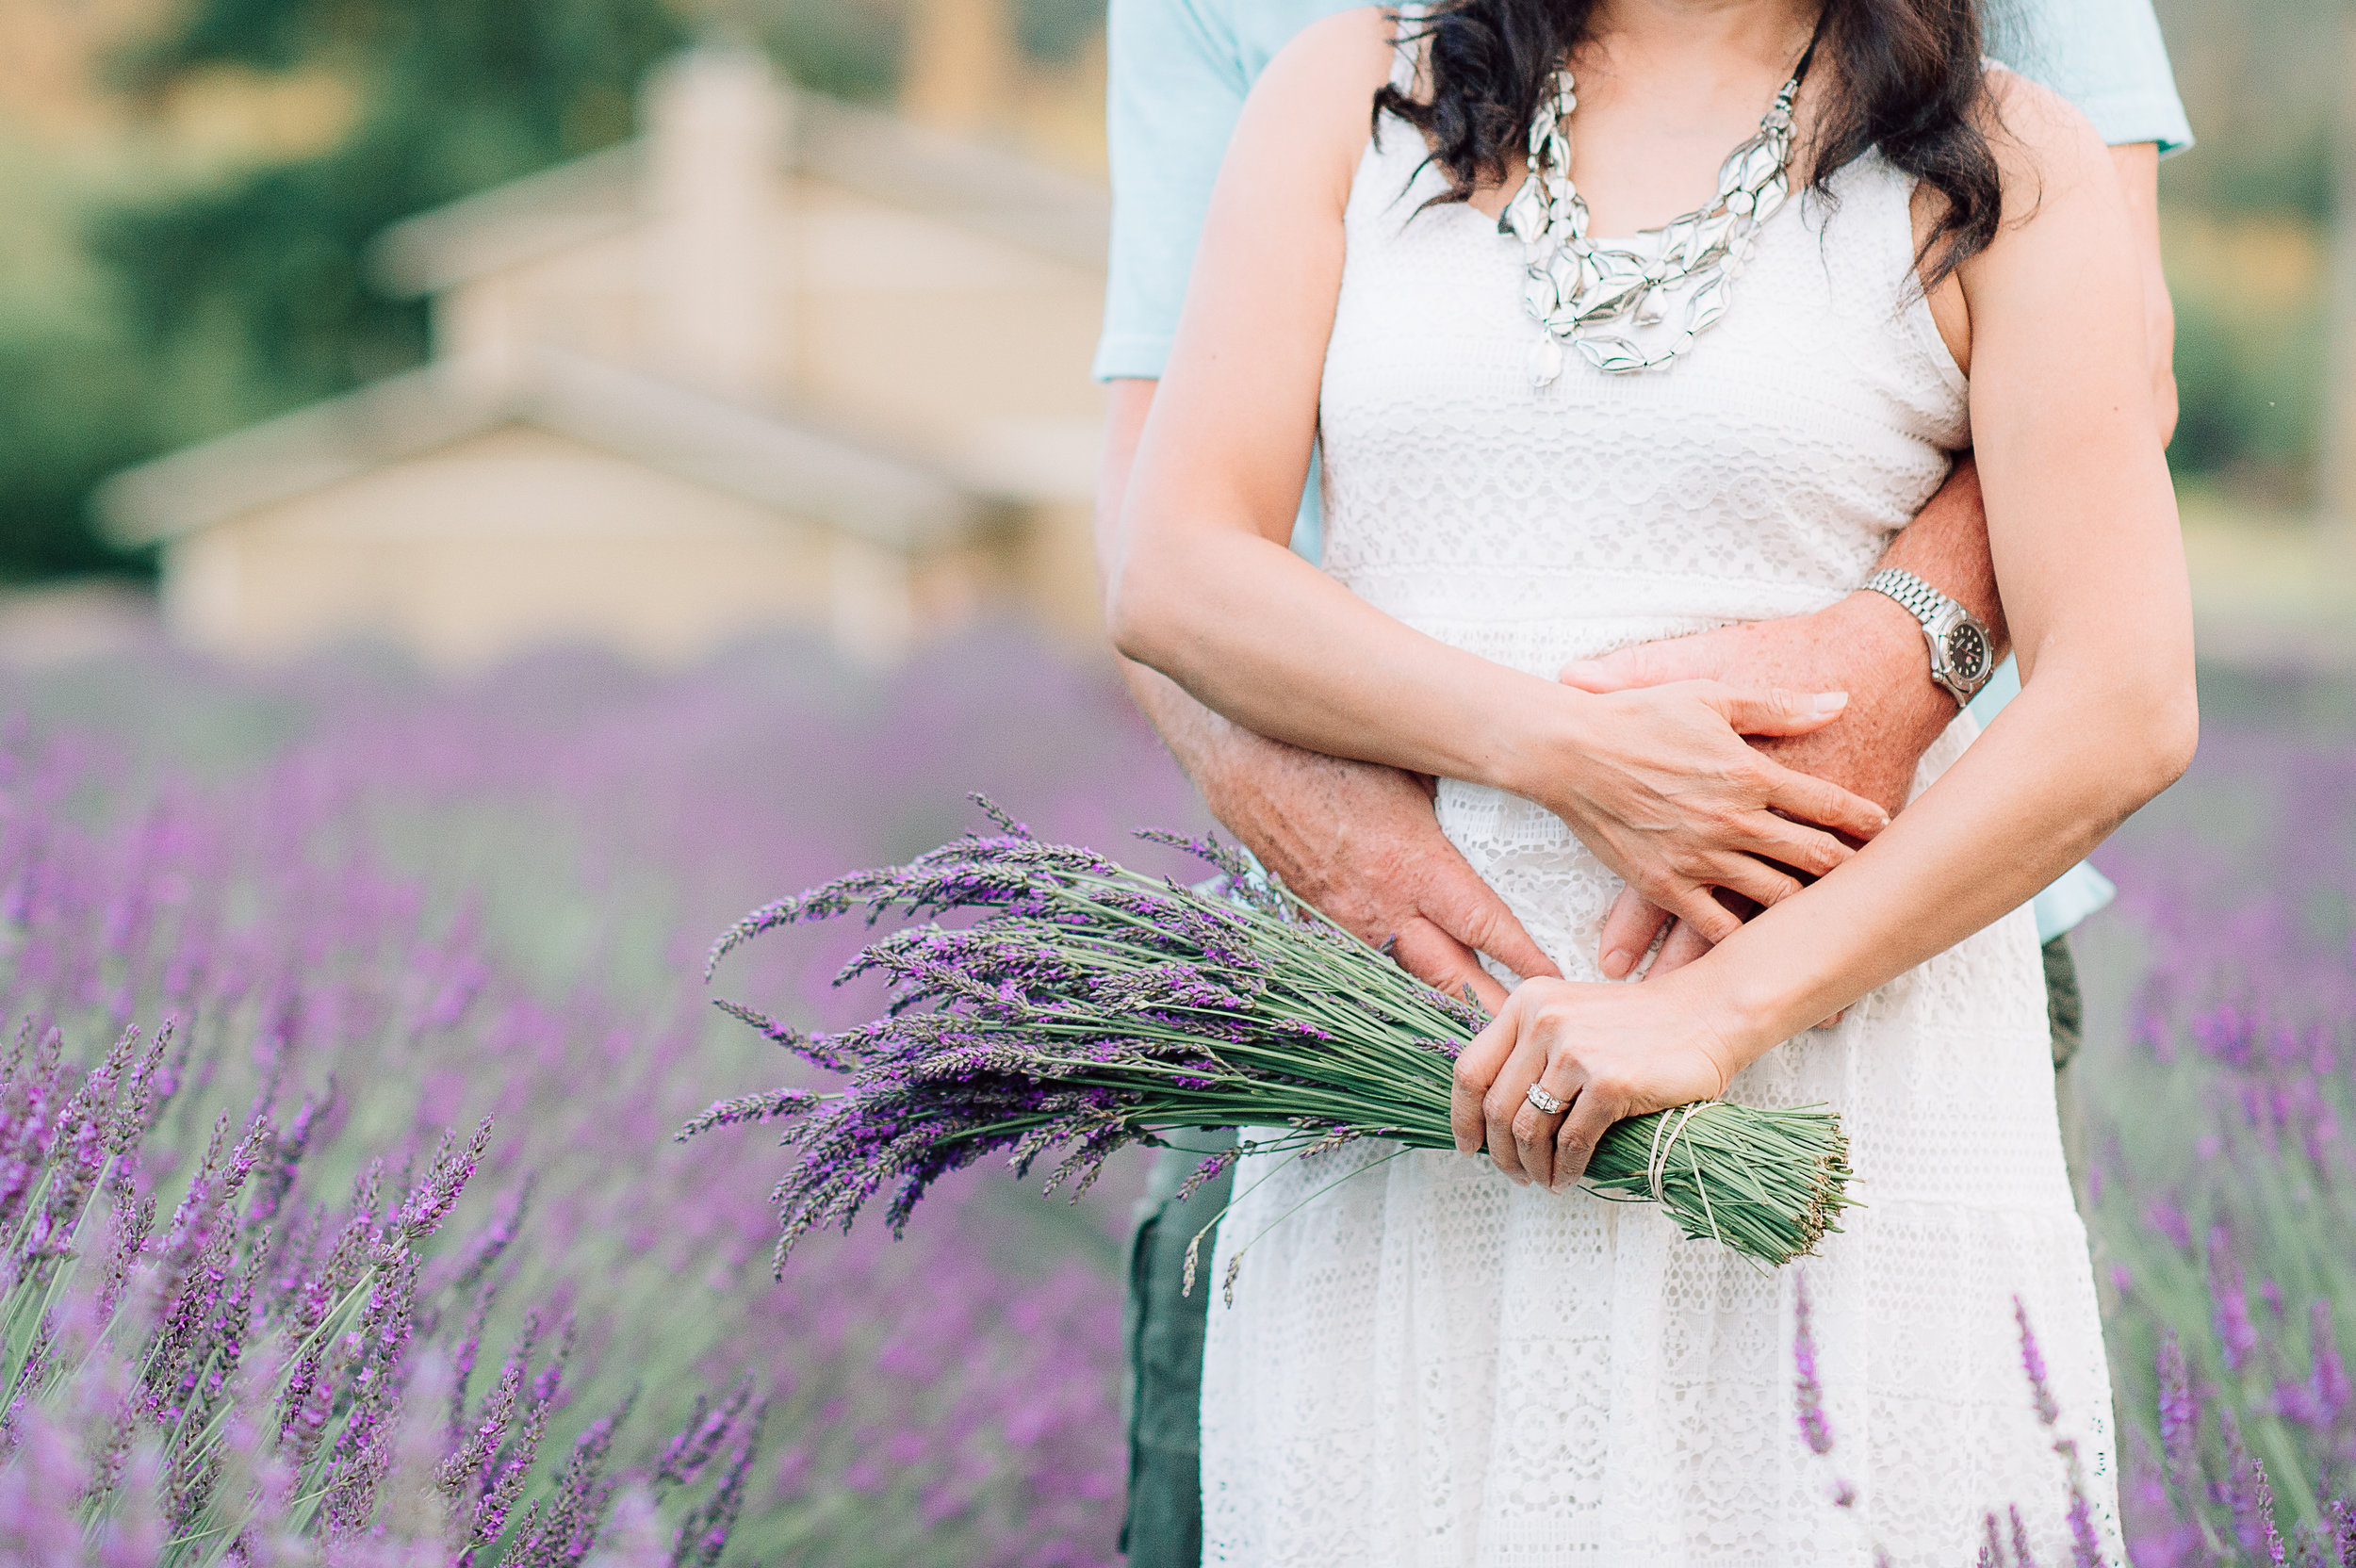 engagement_lavenderfield_youseephotography_LidiaOtto (69).jpg